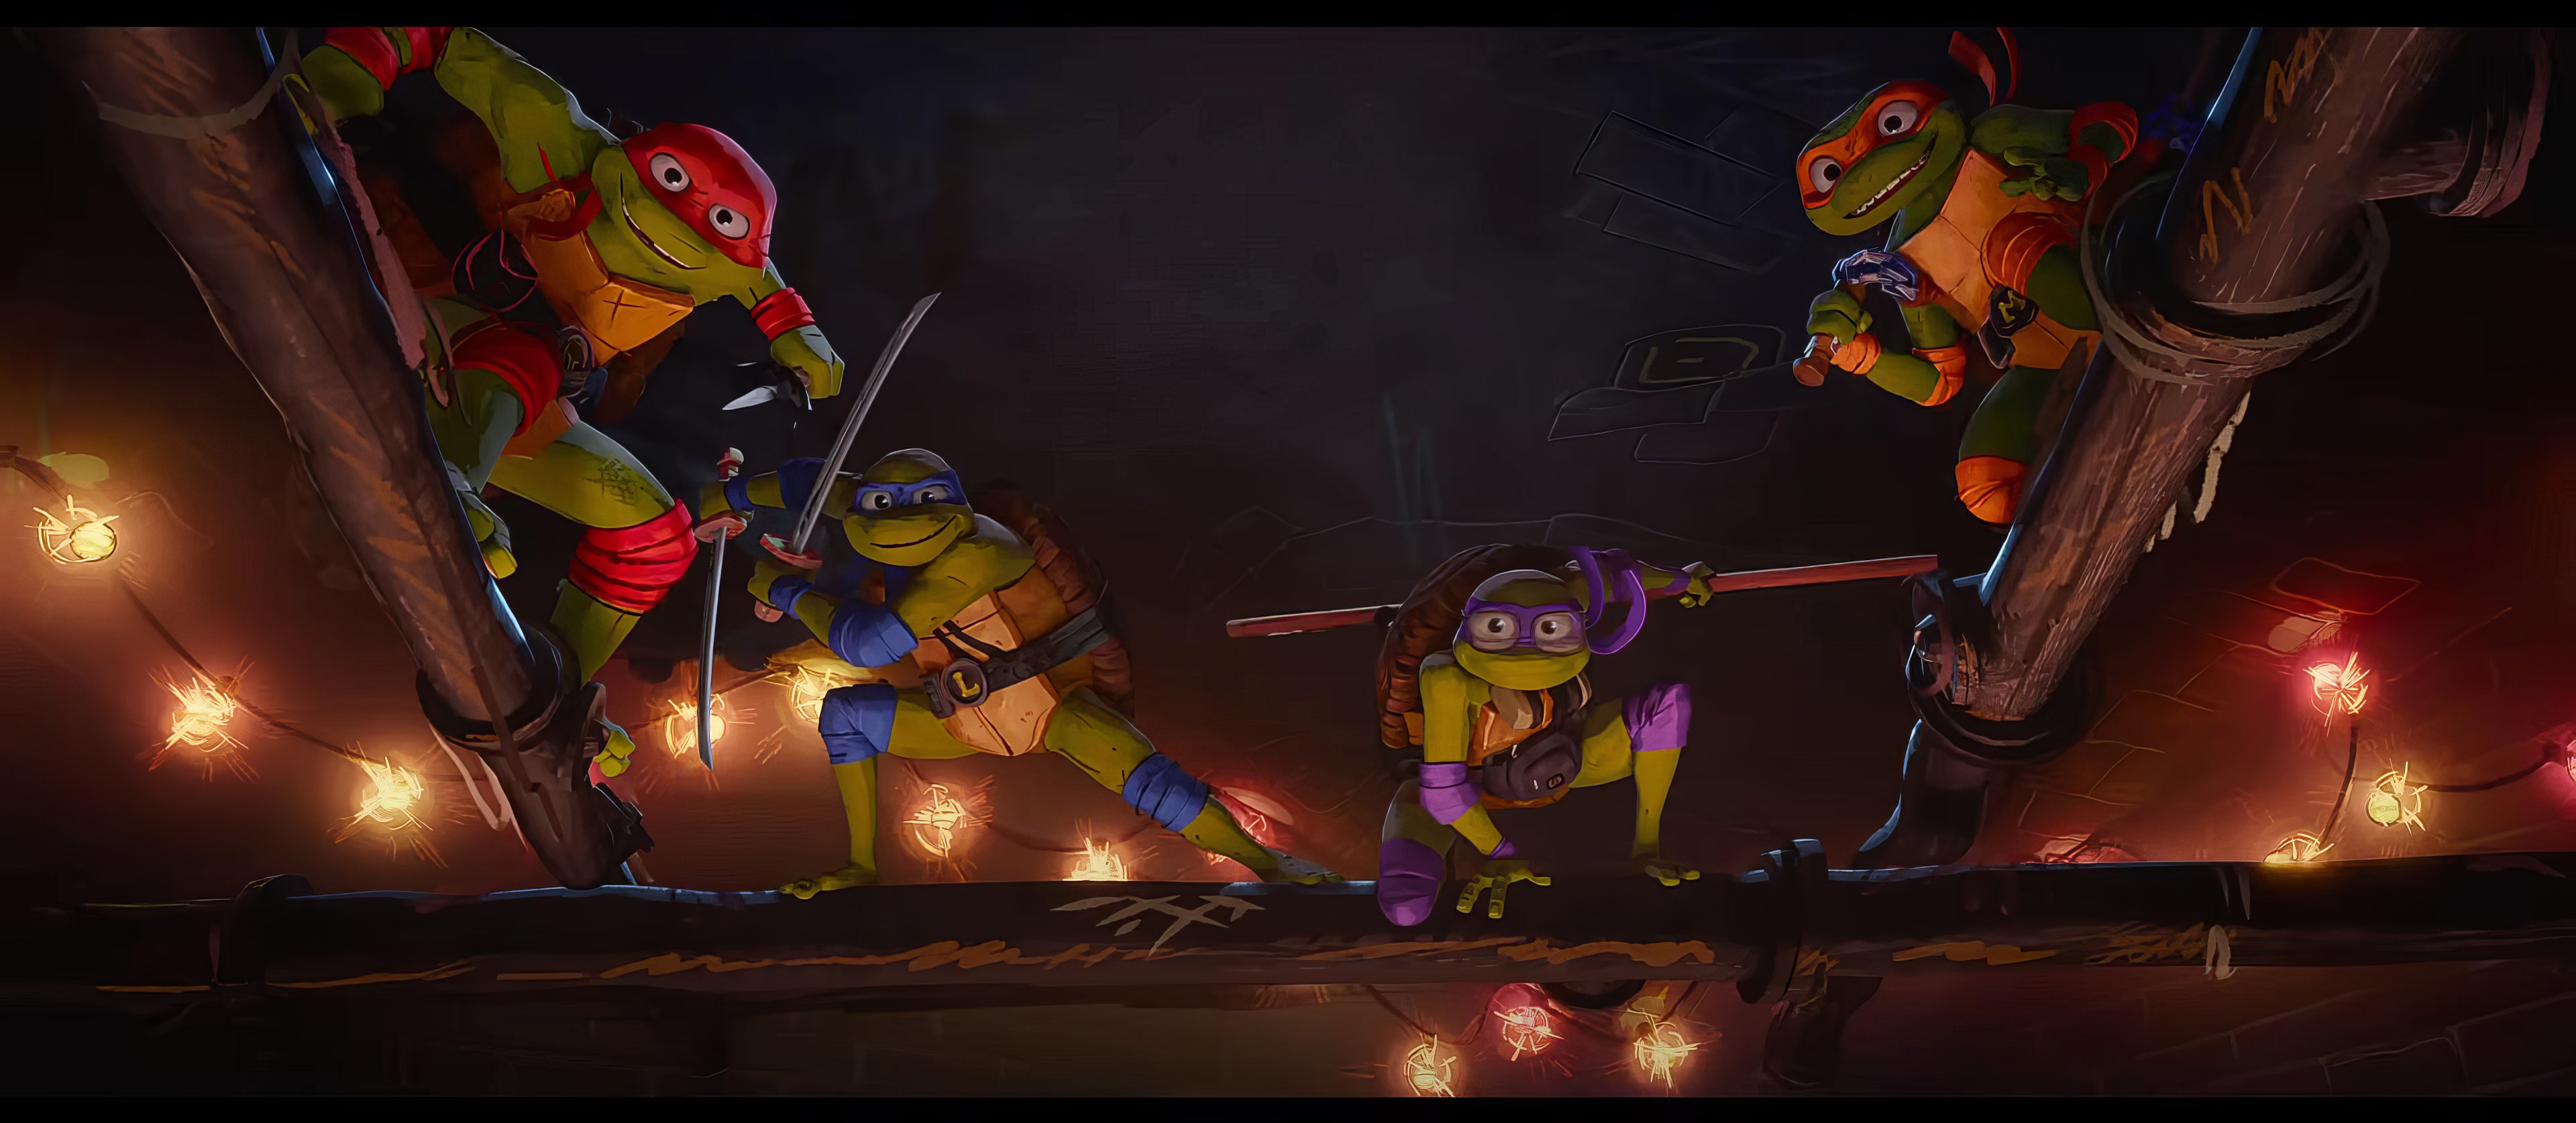 HD wallpaper featuring the Teenage Mutant Ninja Turtles characters from Mutant Mayhem, ideal for desktop backgrounds.